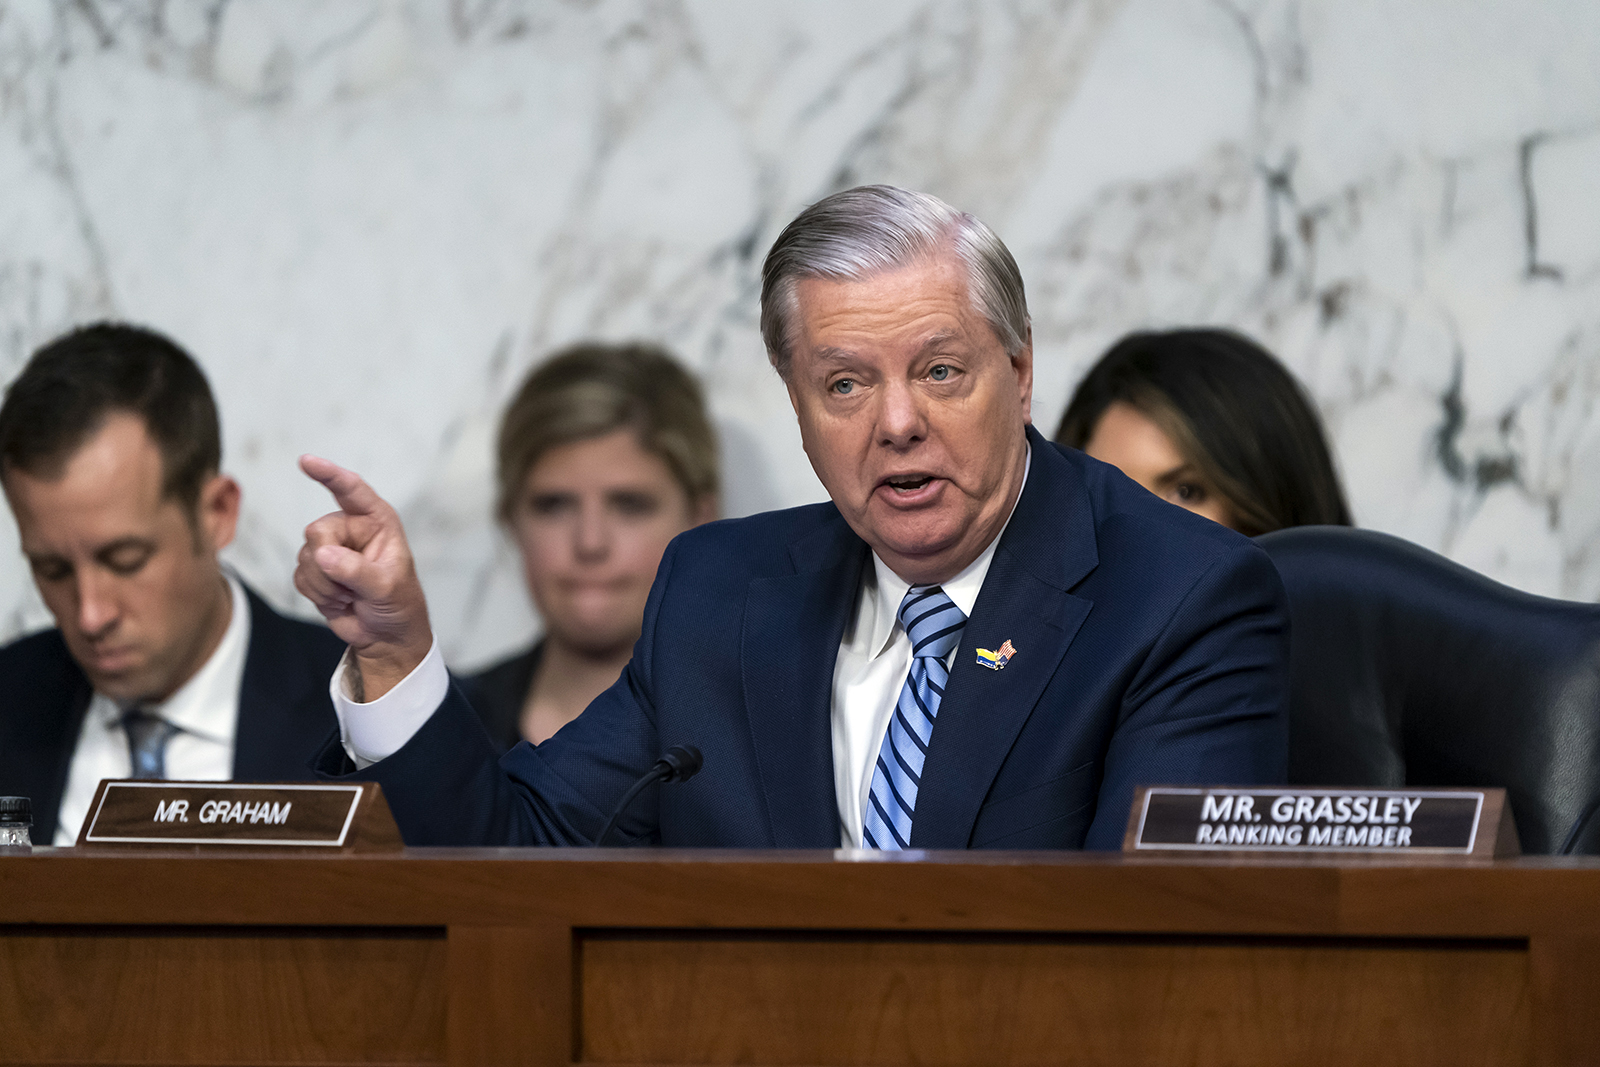 Sen. Lindsey Graham, R-S.C., a former chairman of the Senate Judiciary Committee, questions Supreme Court nominee Ketanji Brown Jackson during her confirmation hearing, on Capitol Hill in Washington, March 22, 2022. (AP Photo/J. Scott Applewhite)